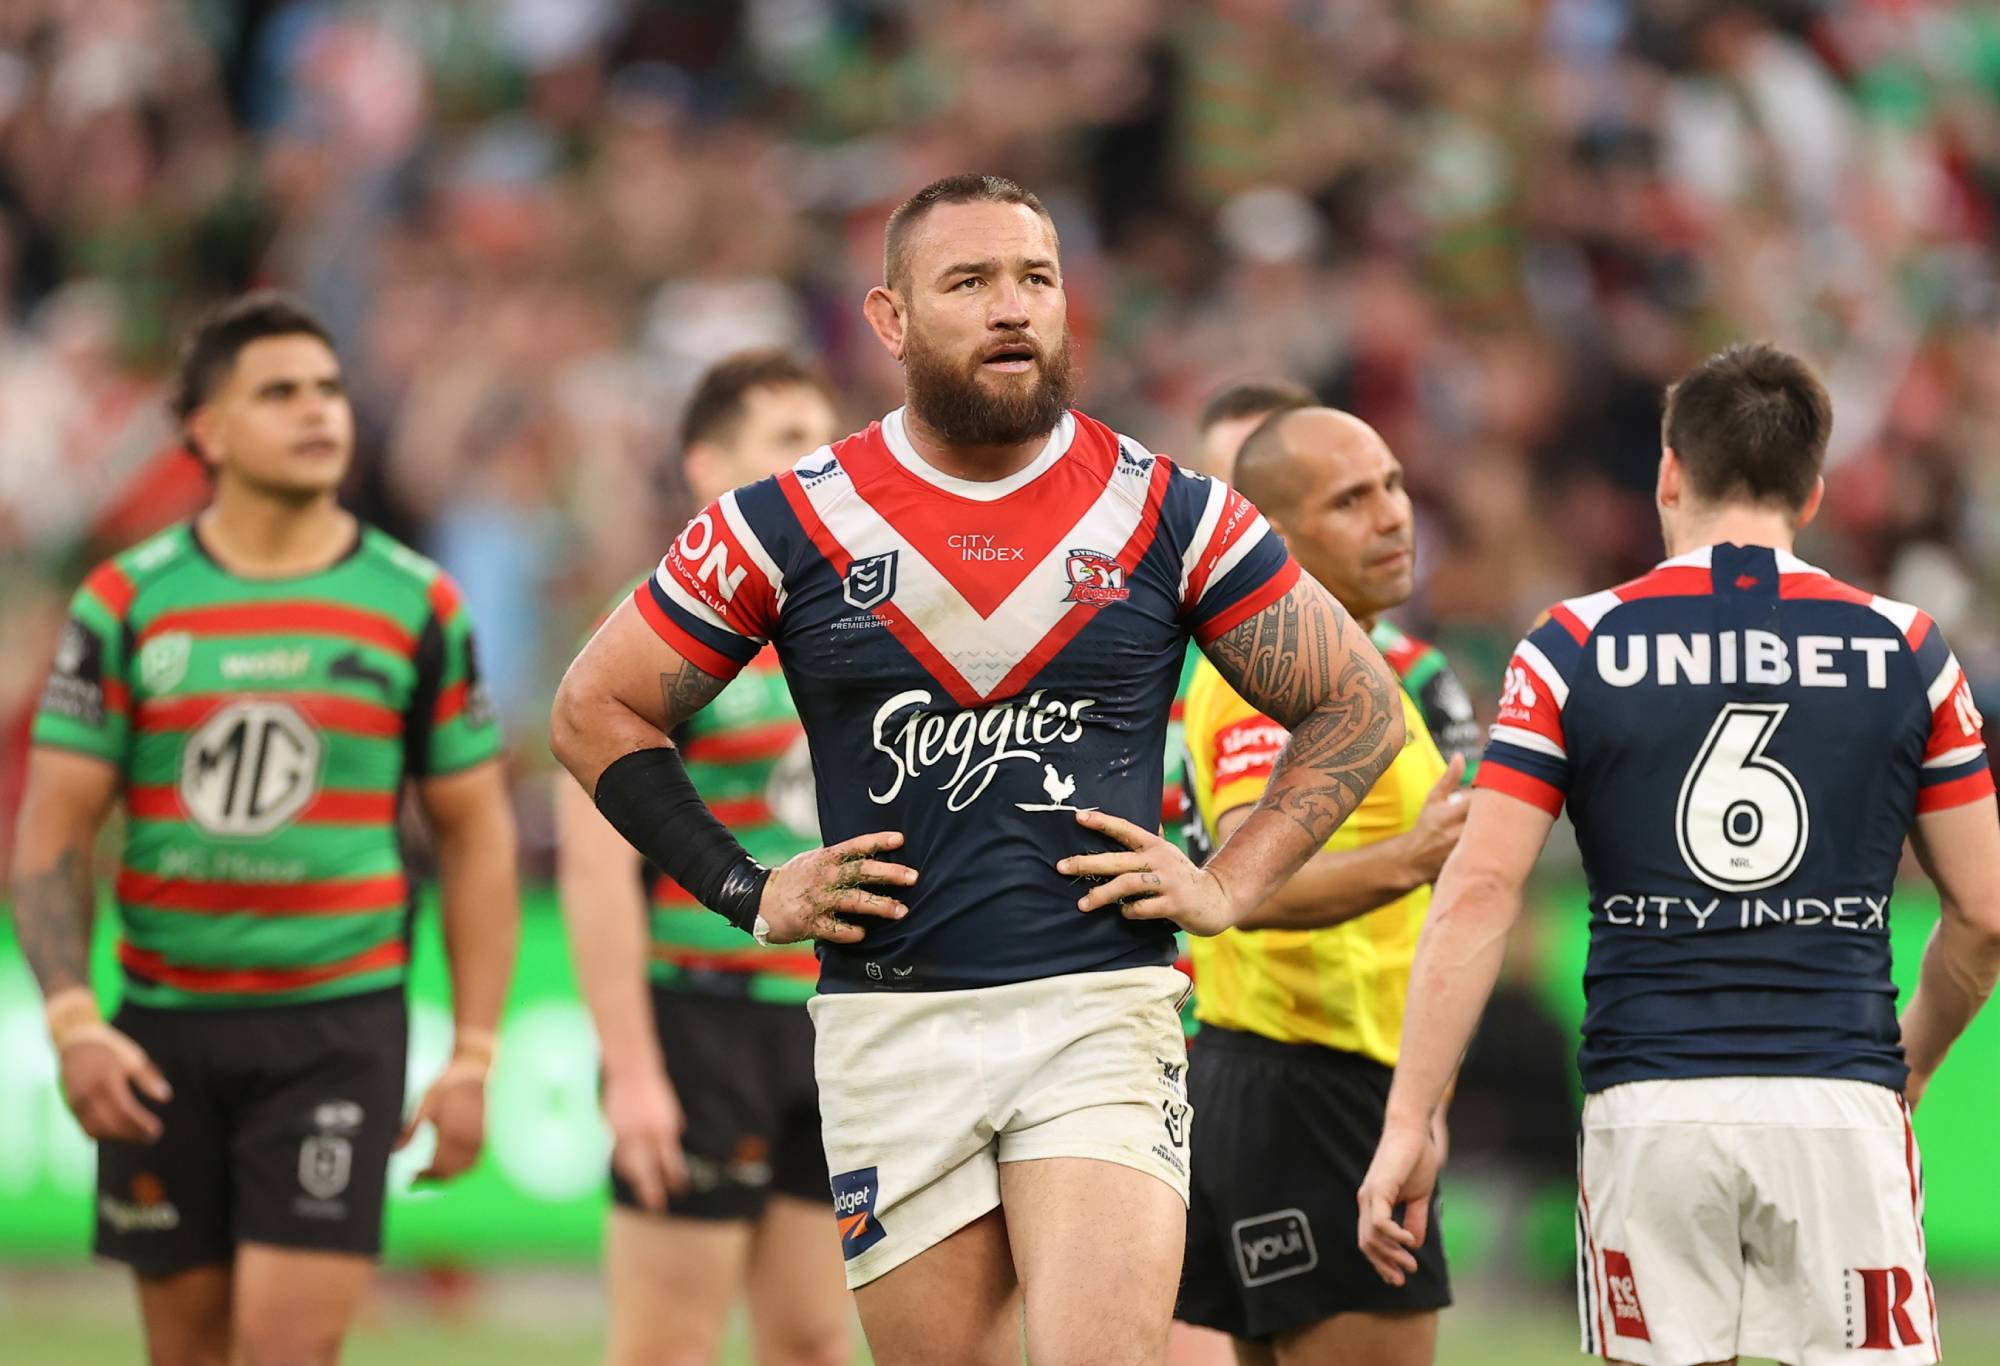 SYDNEY, AUSTRALIA - SEPTEMBER 11: Jared Waerea-Hargreaves of the Roosters reacts after been sent to the sin bin by referee Ashley Klein during the NRL Elimination Final match between the Sydney Roosters and the South Sydney Rabbitohs at Allianz Stadium on September 11, 2022 in Sydney, Australia. (Photo by Mark Kolbe/Getty Images)